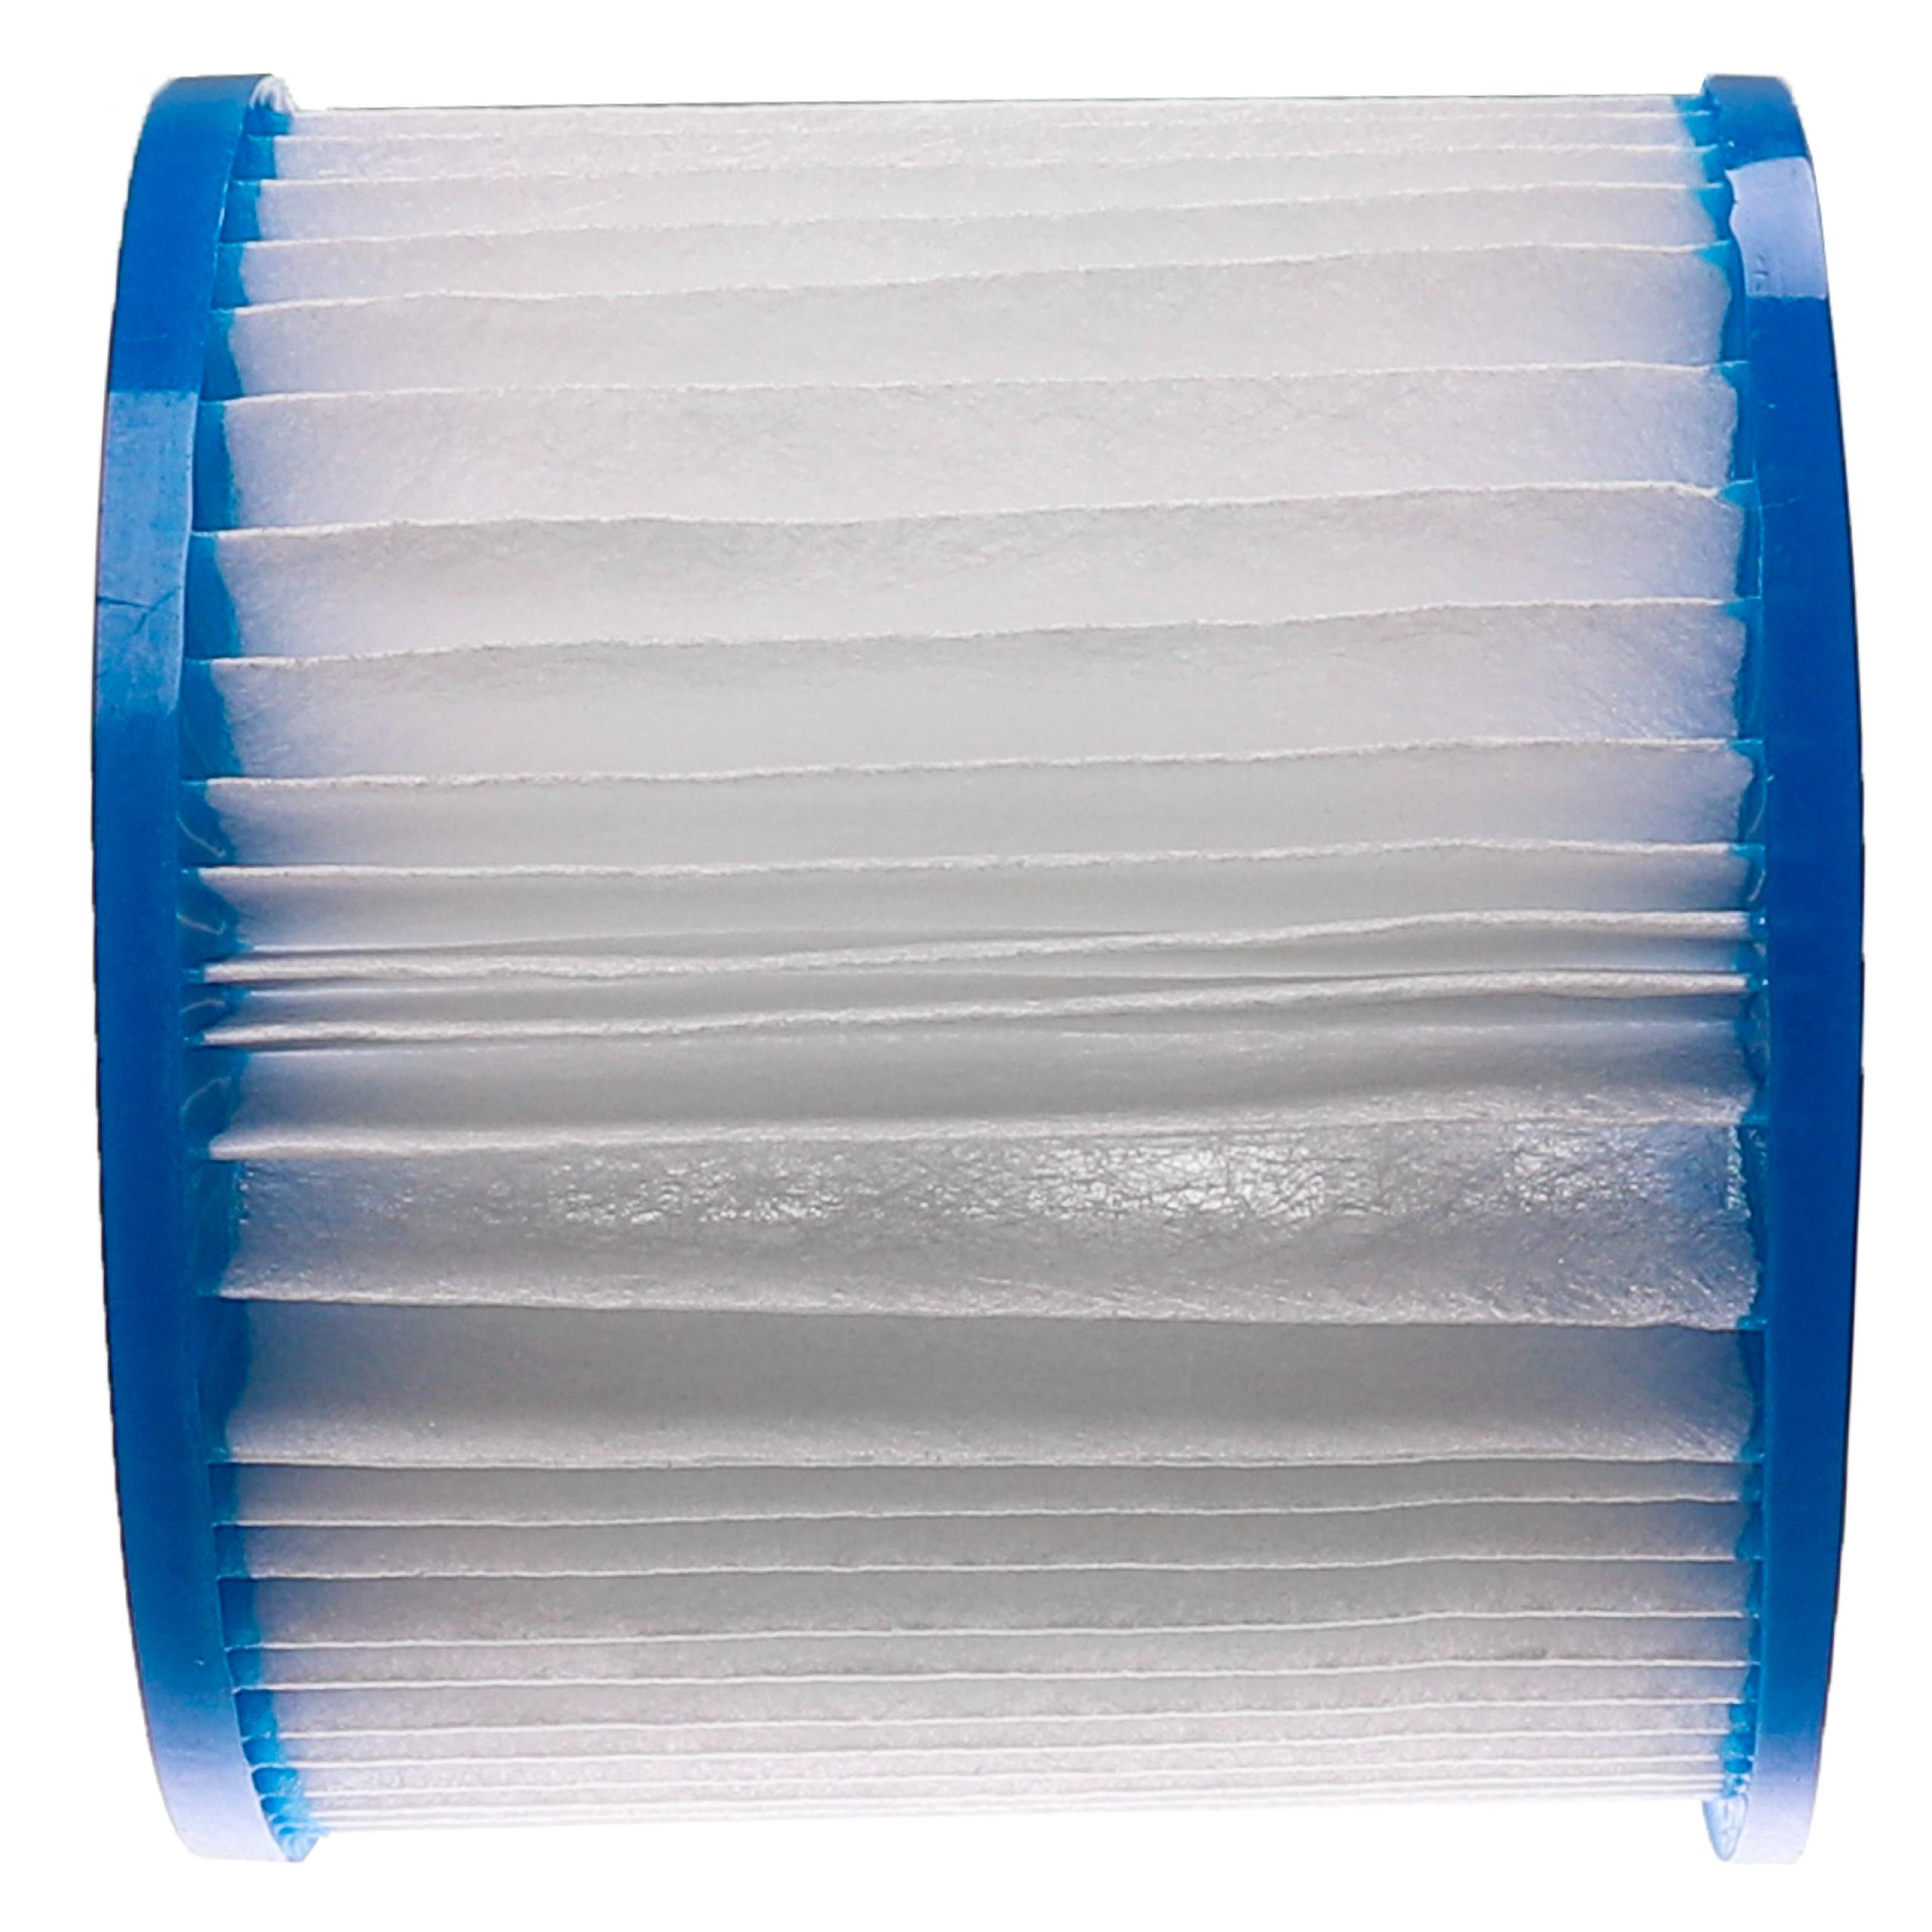 2x Pool Filter Type VII as Replacement for Bestway FD2136, Typ VII, Typ D - Filter Cartridge